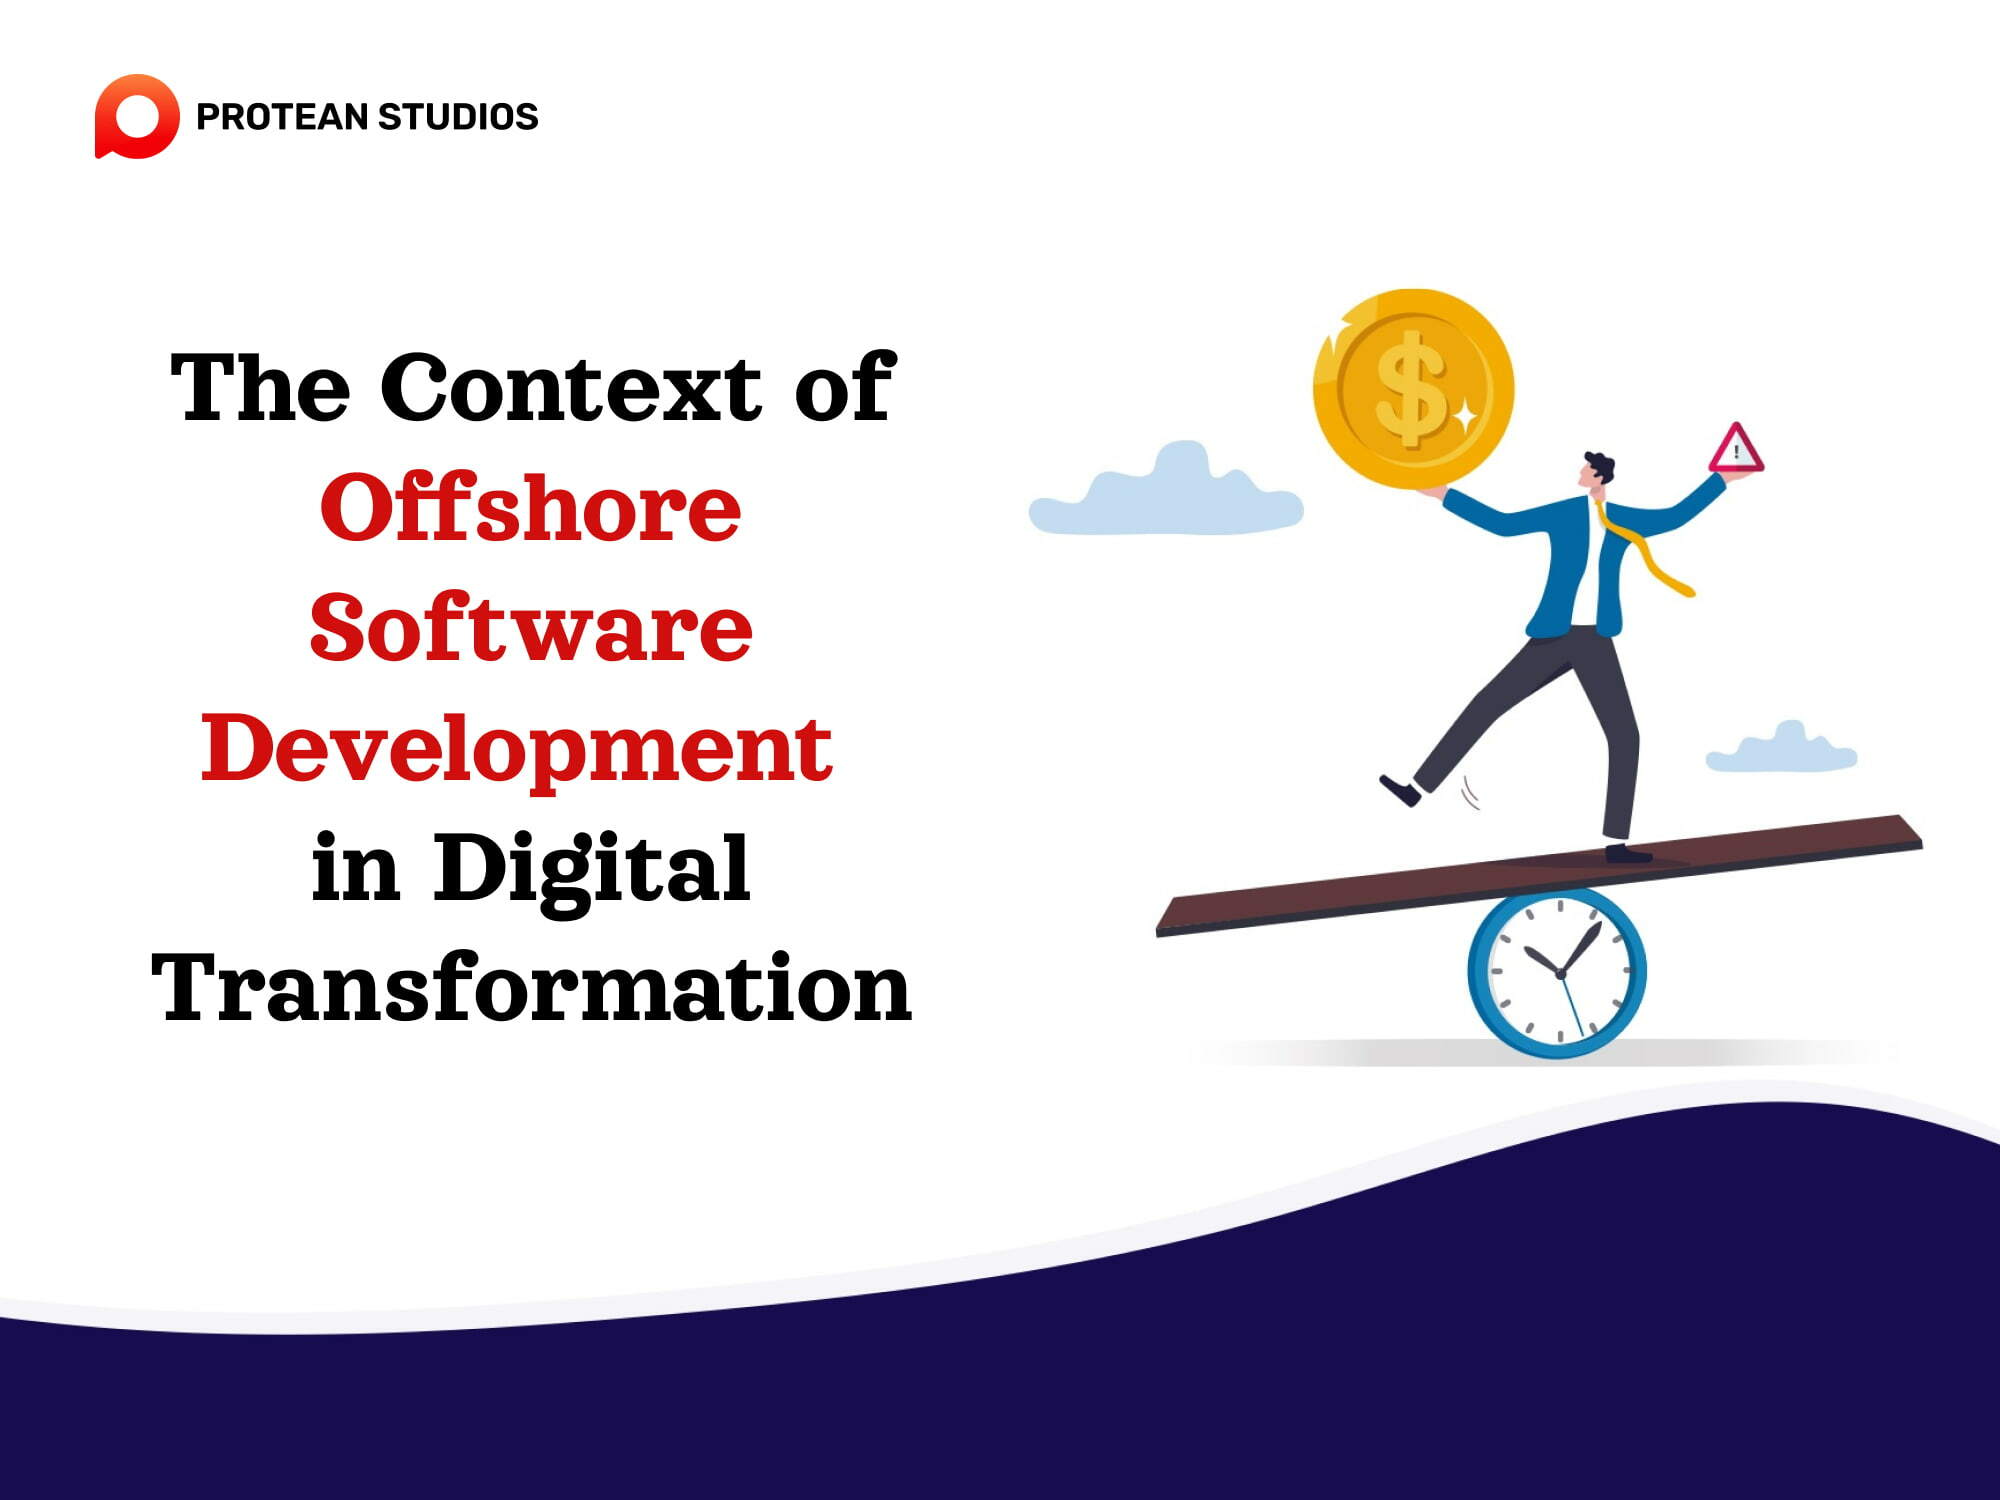 The development of offshore software in DX